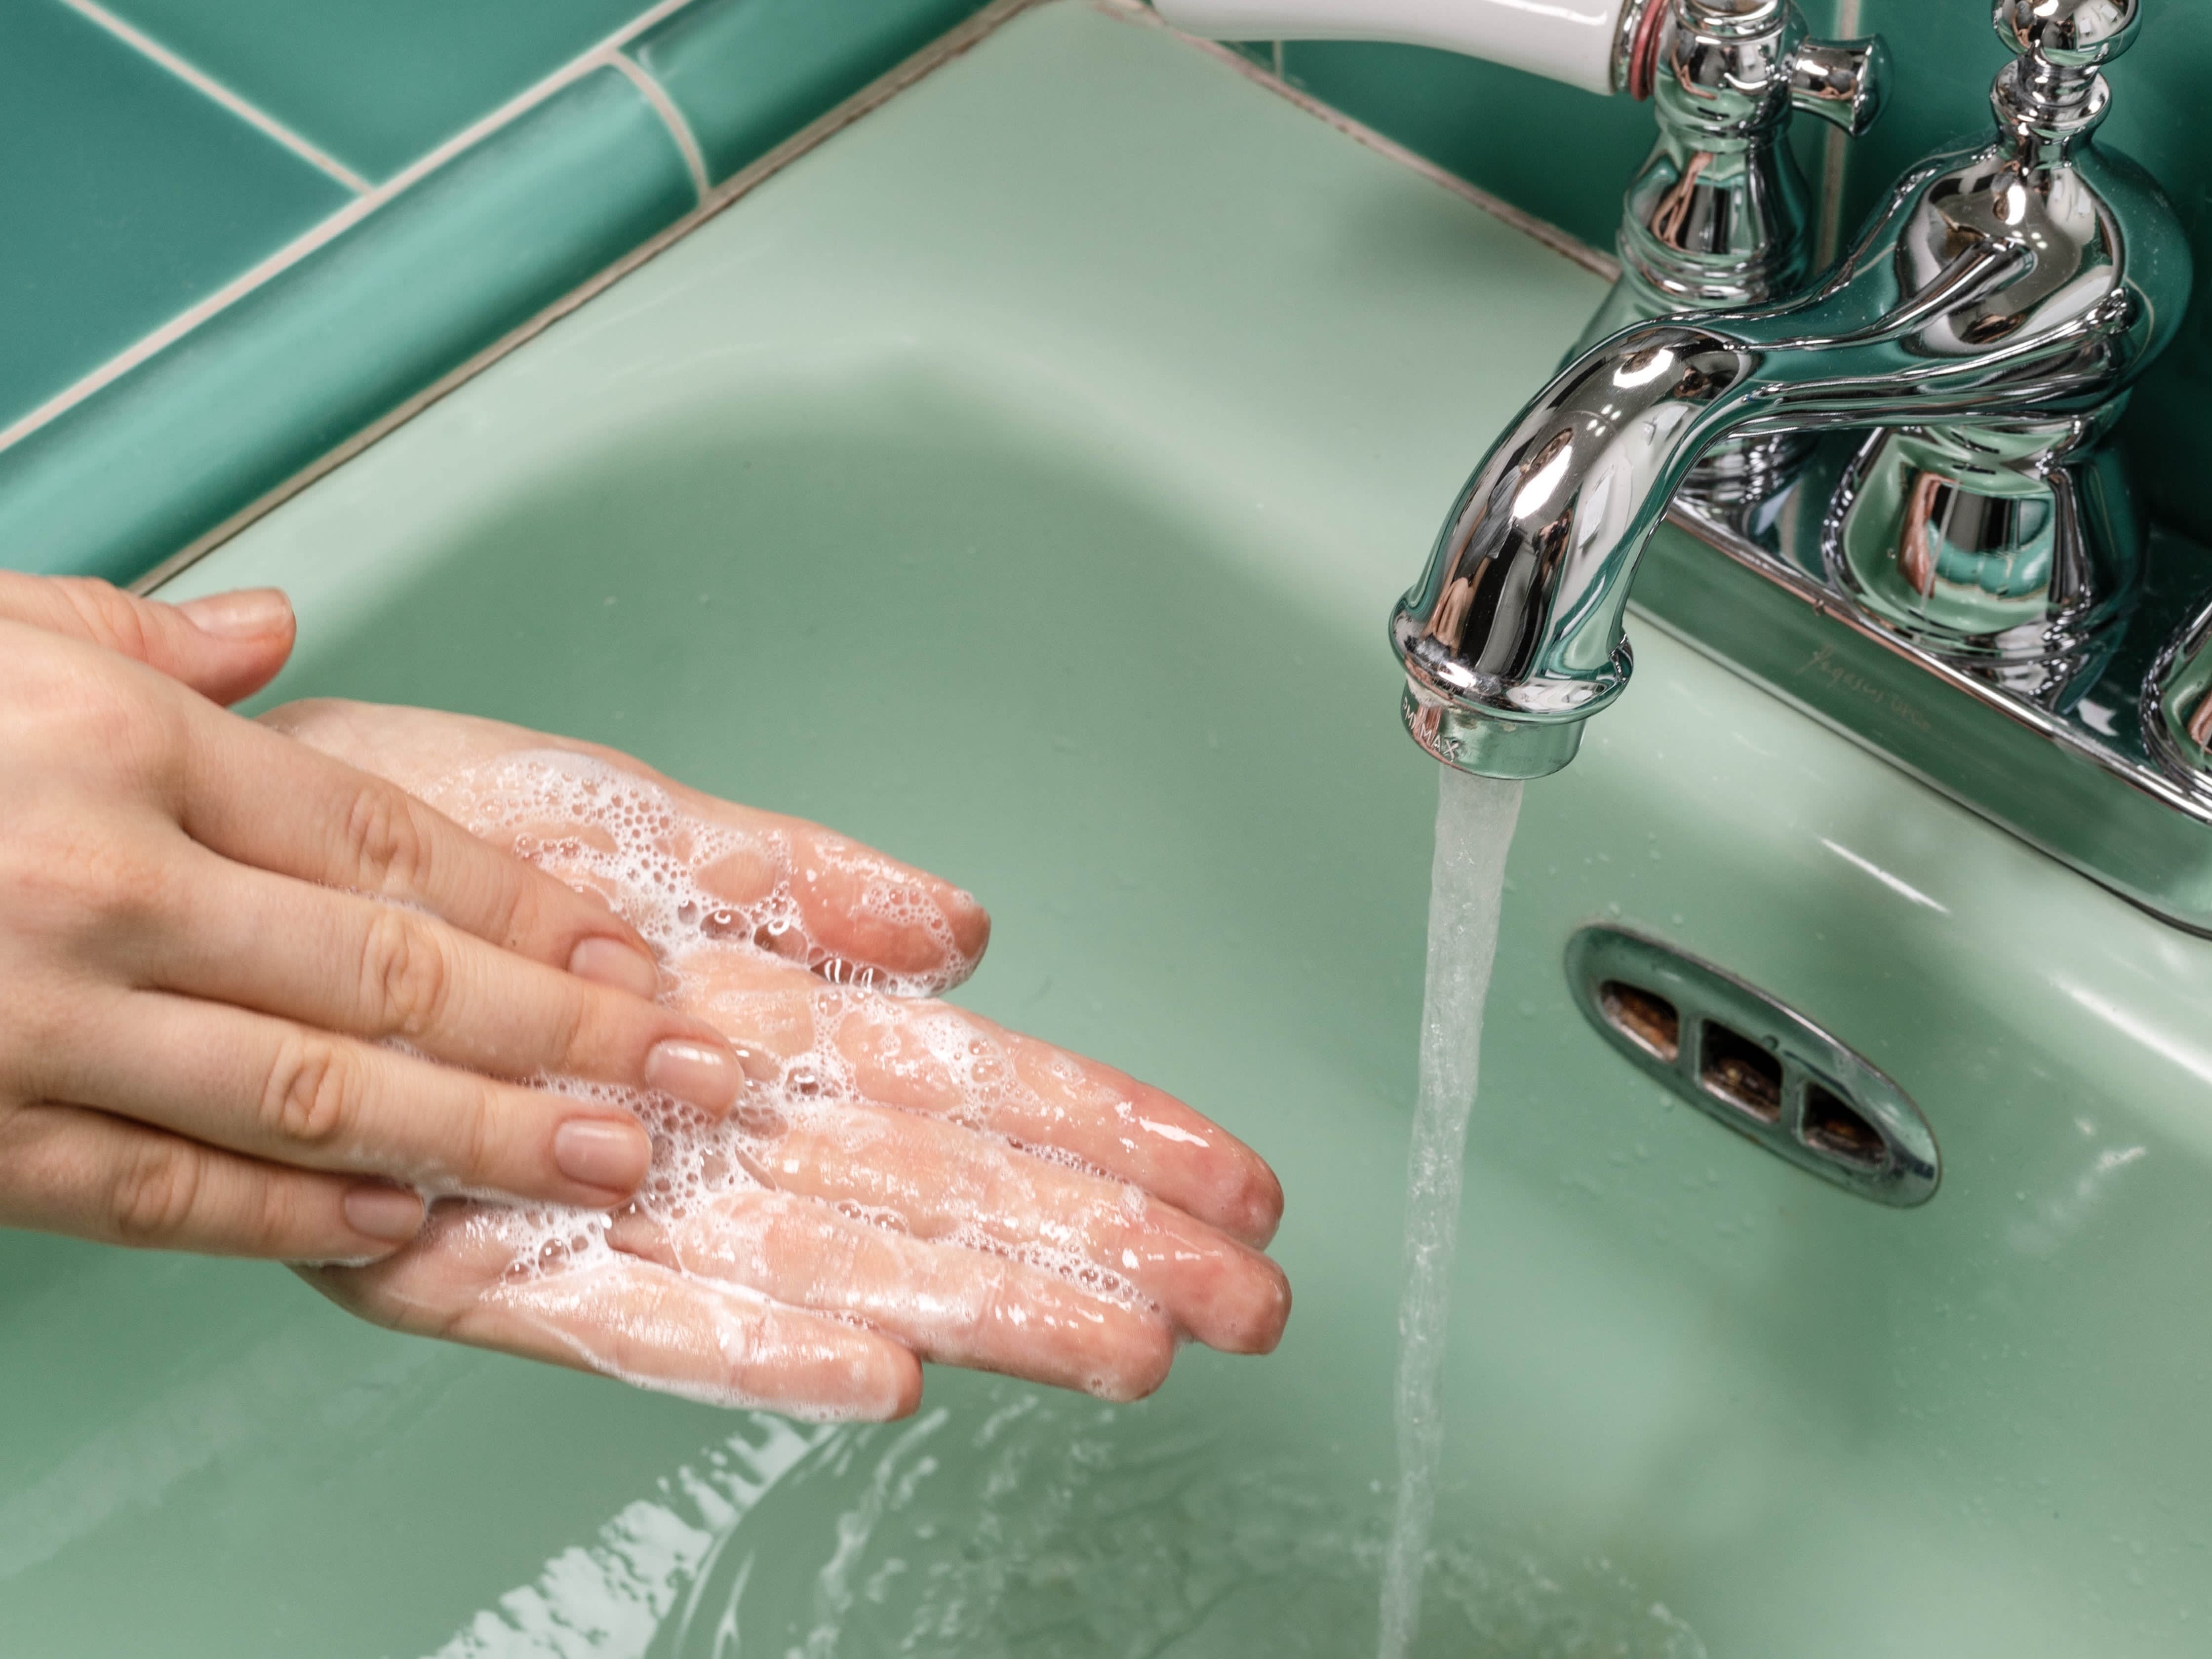 Woman washing her hands with a handwash in a green sink with the water running.